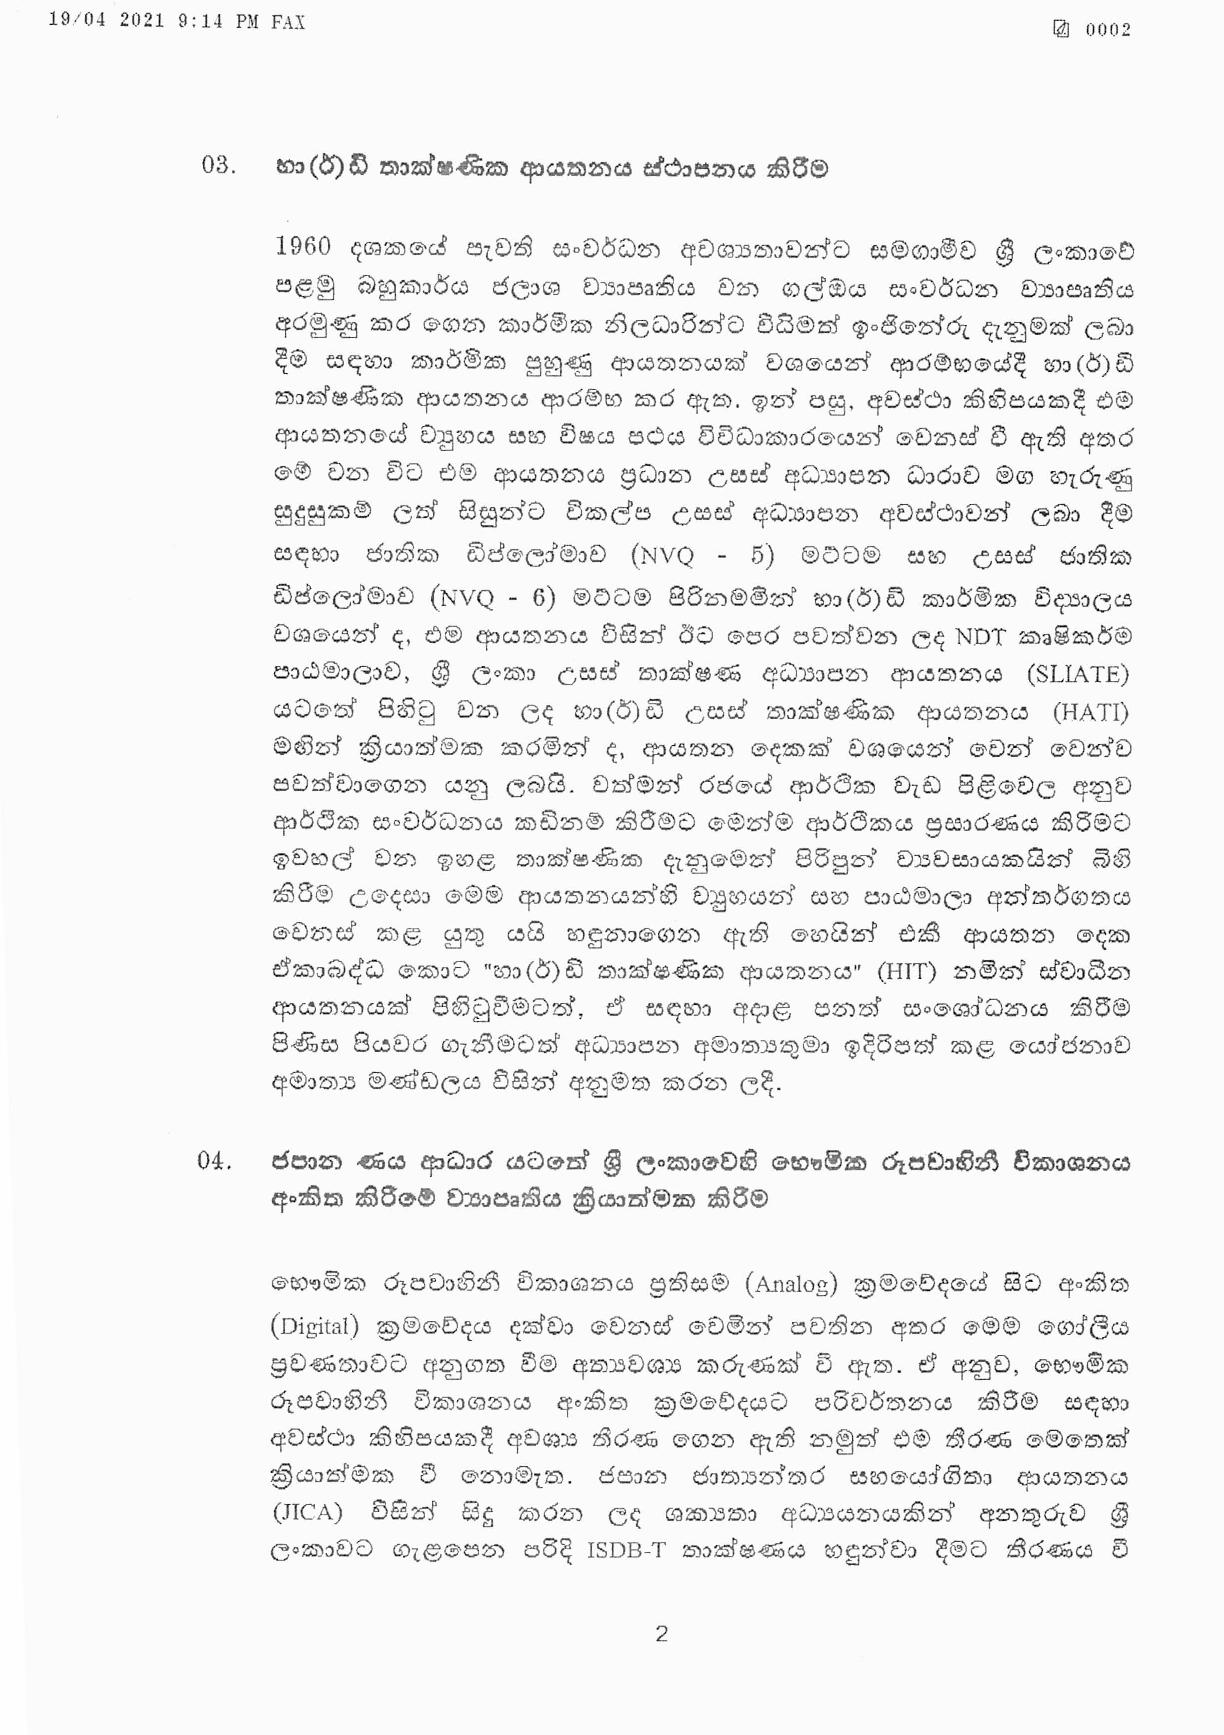 Cabinet Decision on 19.04.2021 page 002